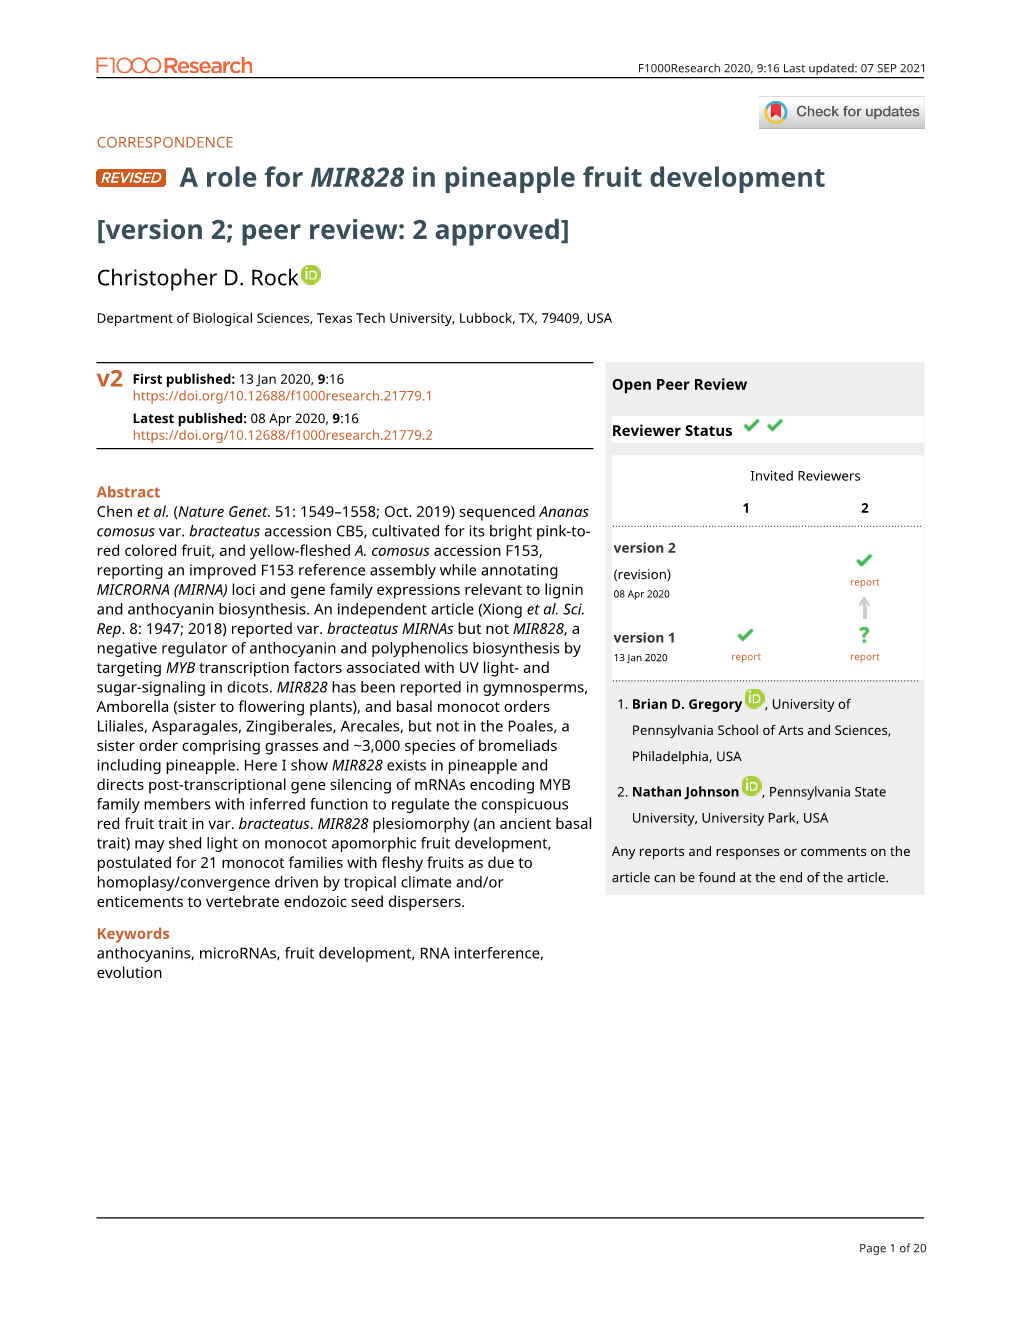 A Role for MIR828 in Pineapple Fruit Development [Version 2; Peer Review: 2 Approved]